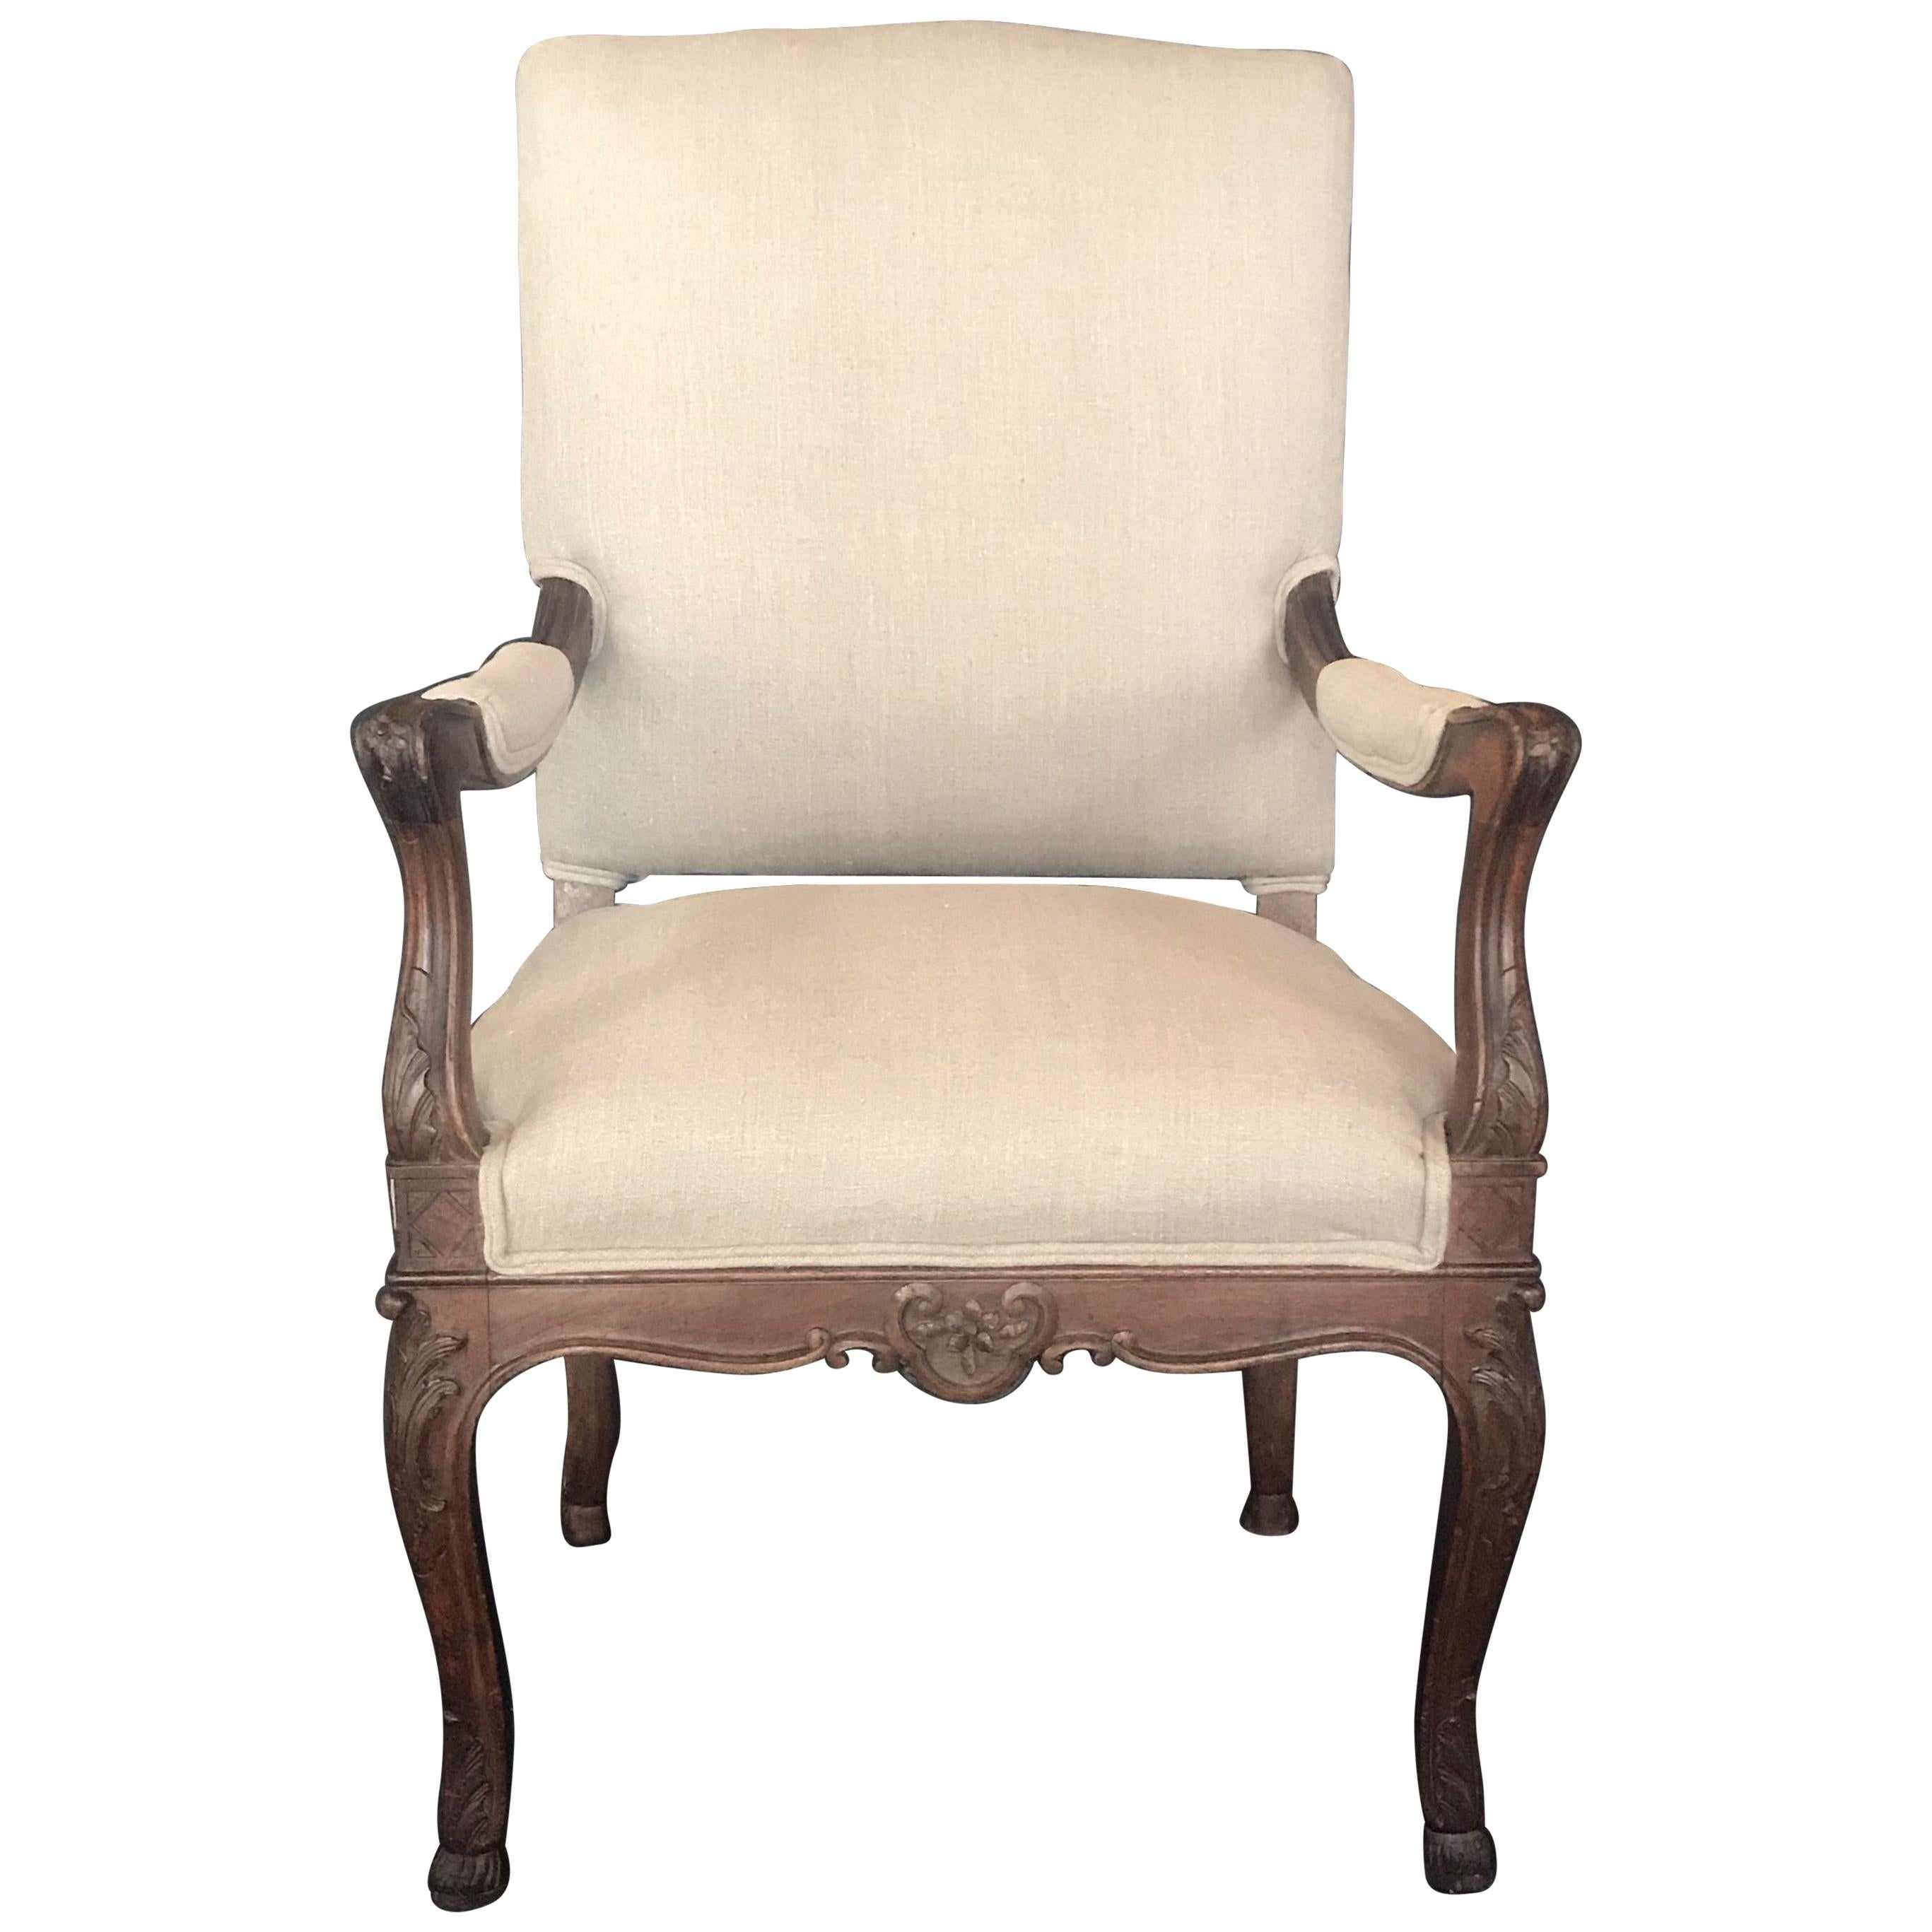 19th Century French Carved Regency Walnut Chair with Fabulous Hoof Feet